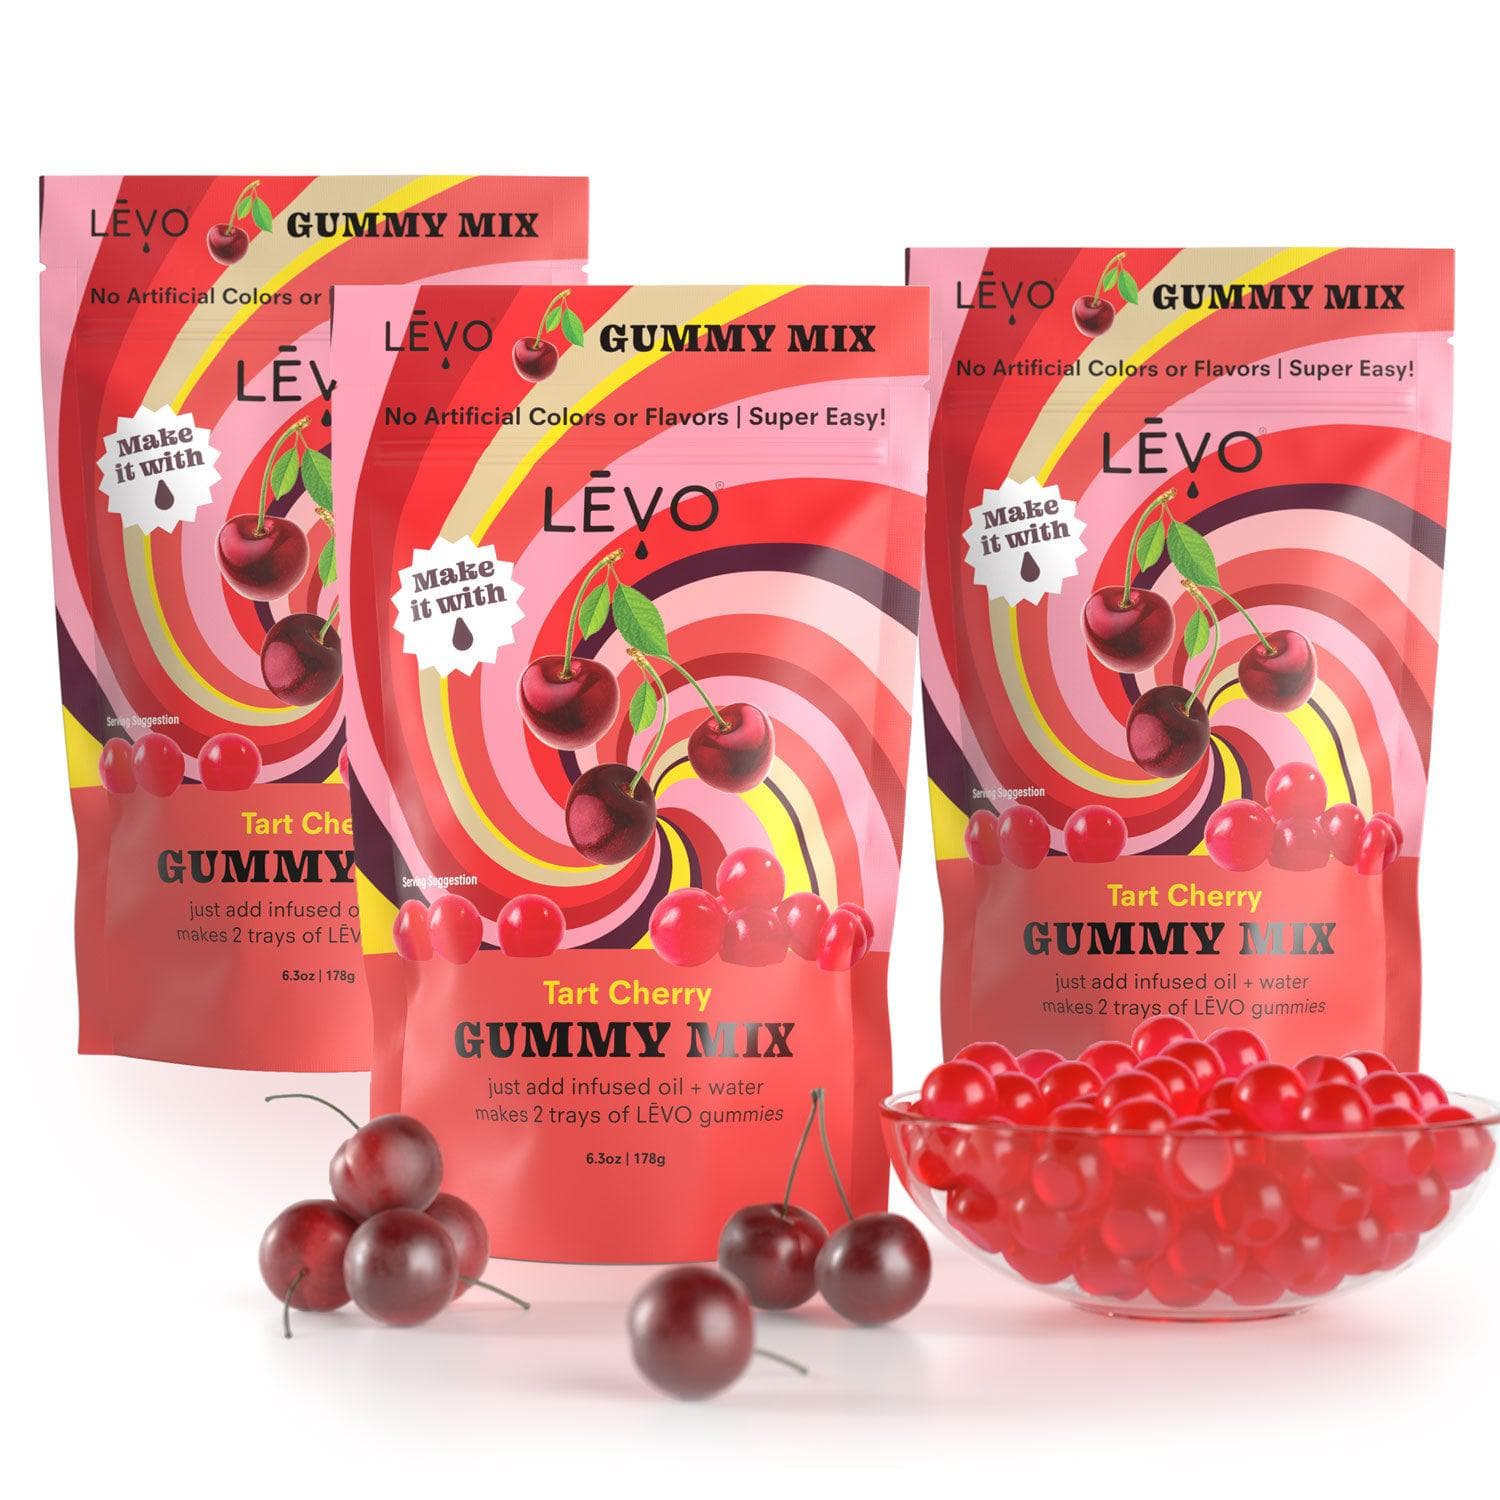 Three pack of LĒVO Cherry Gummy Mix. Bundle and Save! Make your own edibles with LEVO gummy mix.